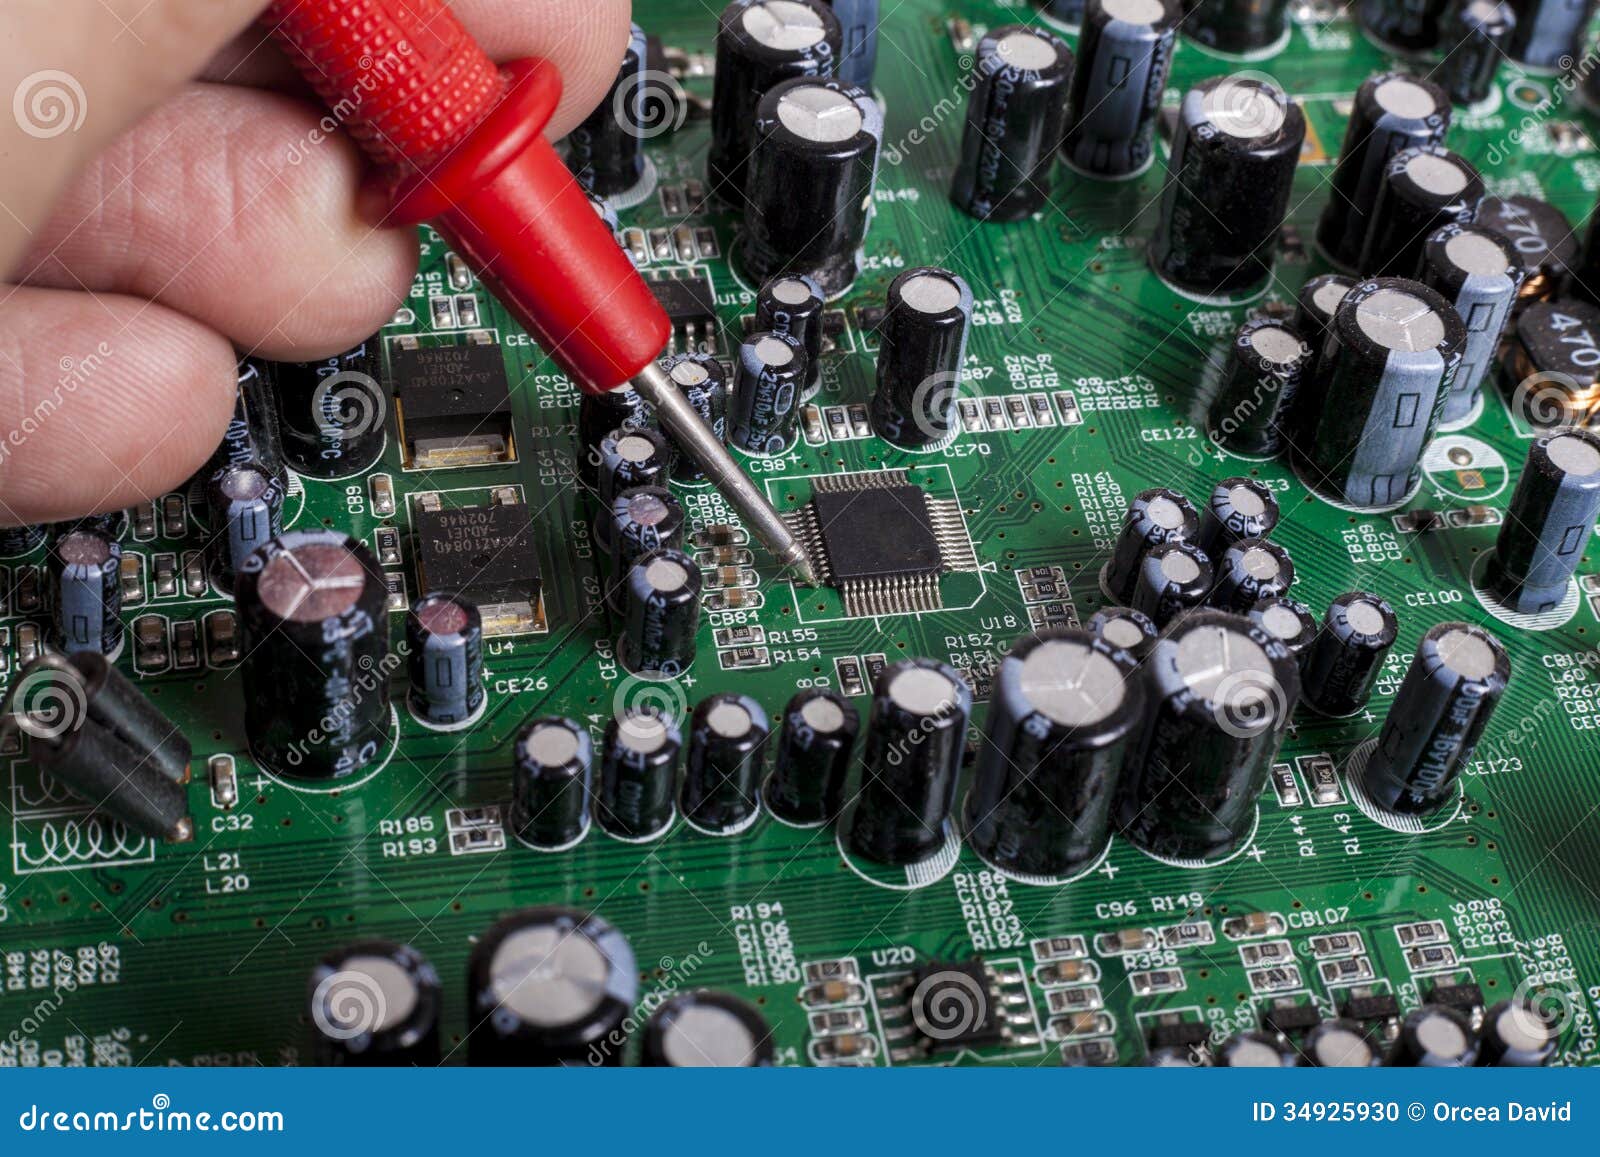 electronics-repair-service-close-up-red-probe-capacitors-electronic ...